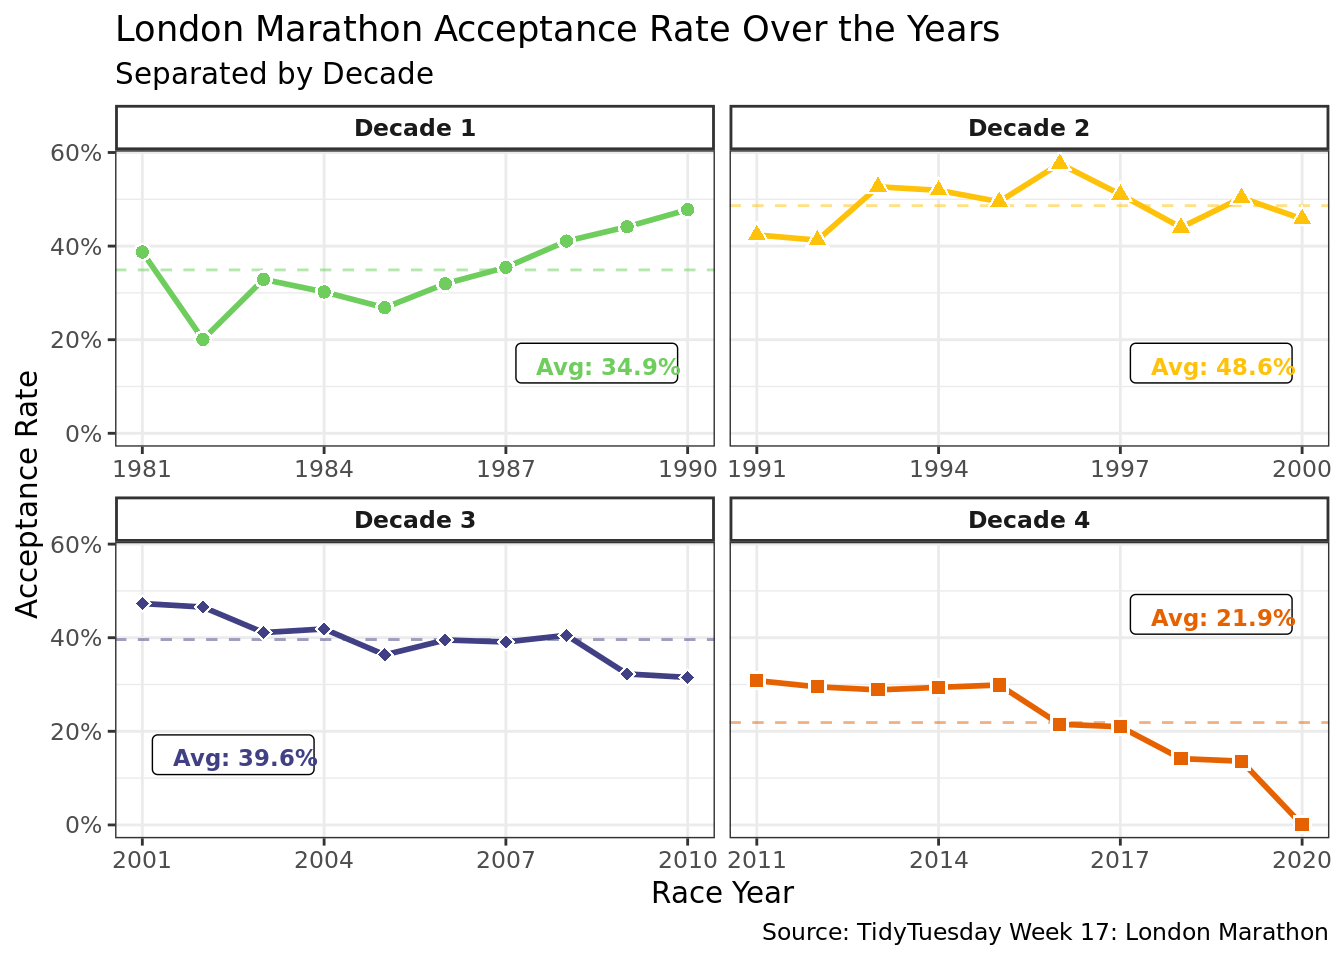 The figure is a line graph with points at each year titled “London Marathon Acceptance Rate Over the Years” with a subtitle “Separated by Decade”. It is facet by decade with Decade 1 from 1981 to 1990, Decade 2 from 1991 to 2000, Decade 3 from 2001 to 2010, and Decade 4 from 2011 to 2020. Decade 1 had an acceptance rate of 34.9%. Decade 2 had an acceptance rate of 48.6%. Decade 3 had an acceptance rate of 39.6%. Decade 4 had an acceptance rate of 21.9%. Decade 1 and 4 were below the mean acceptance rate of 36.3% while Decade 2 and 3 were above.